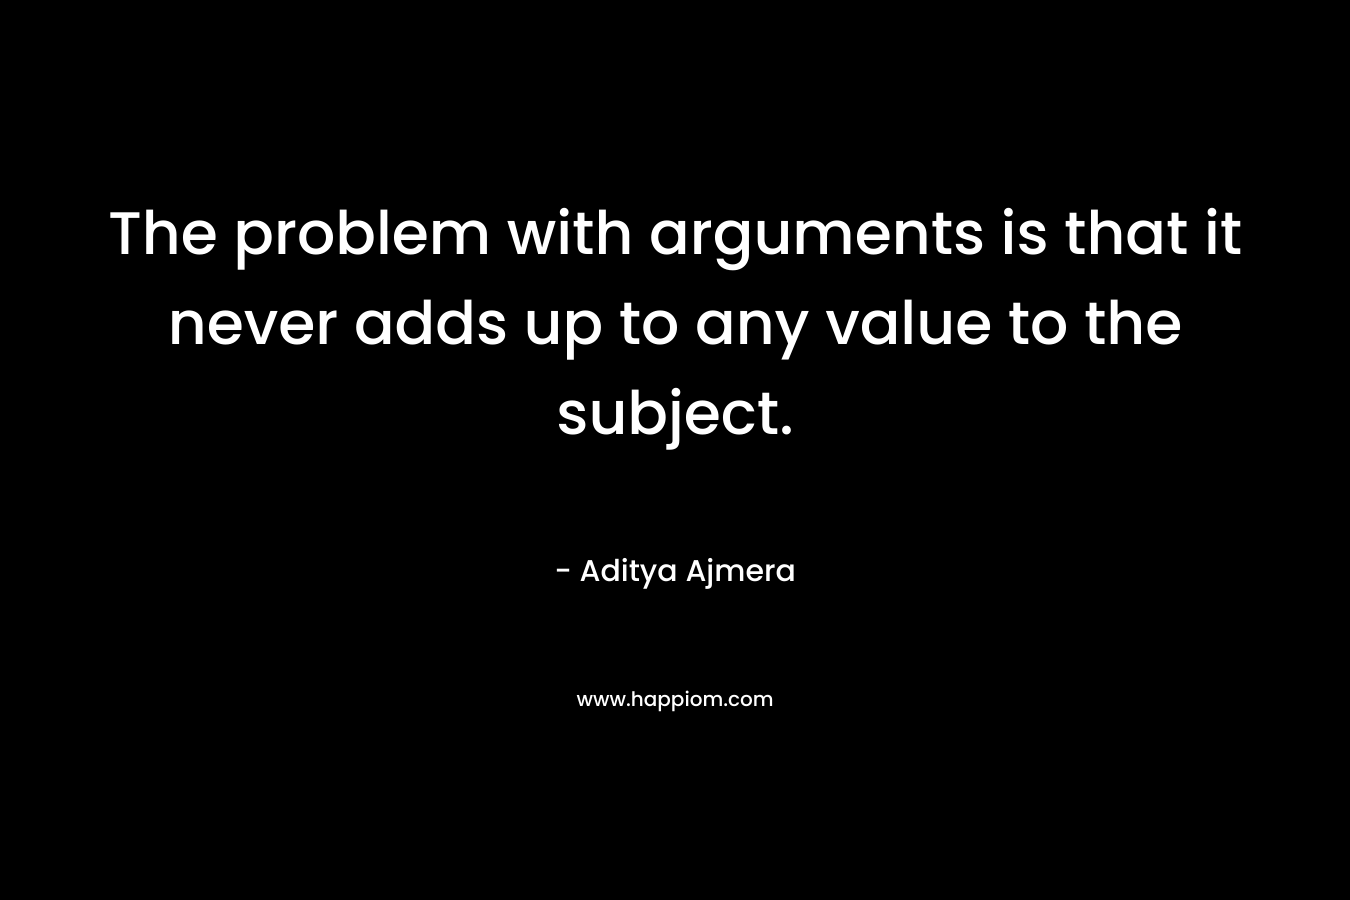 The problem with arguments is that it never adds up to any value to the subject.